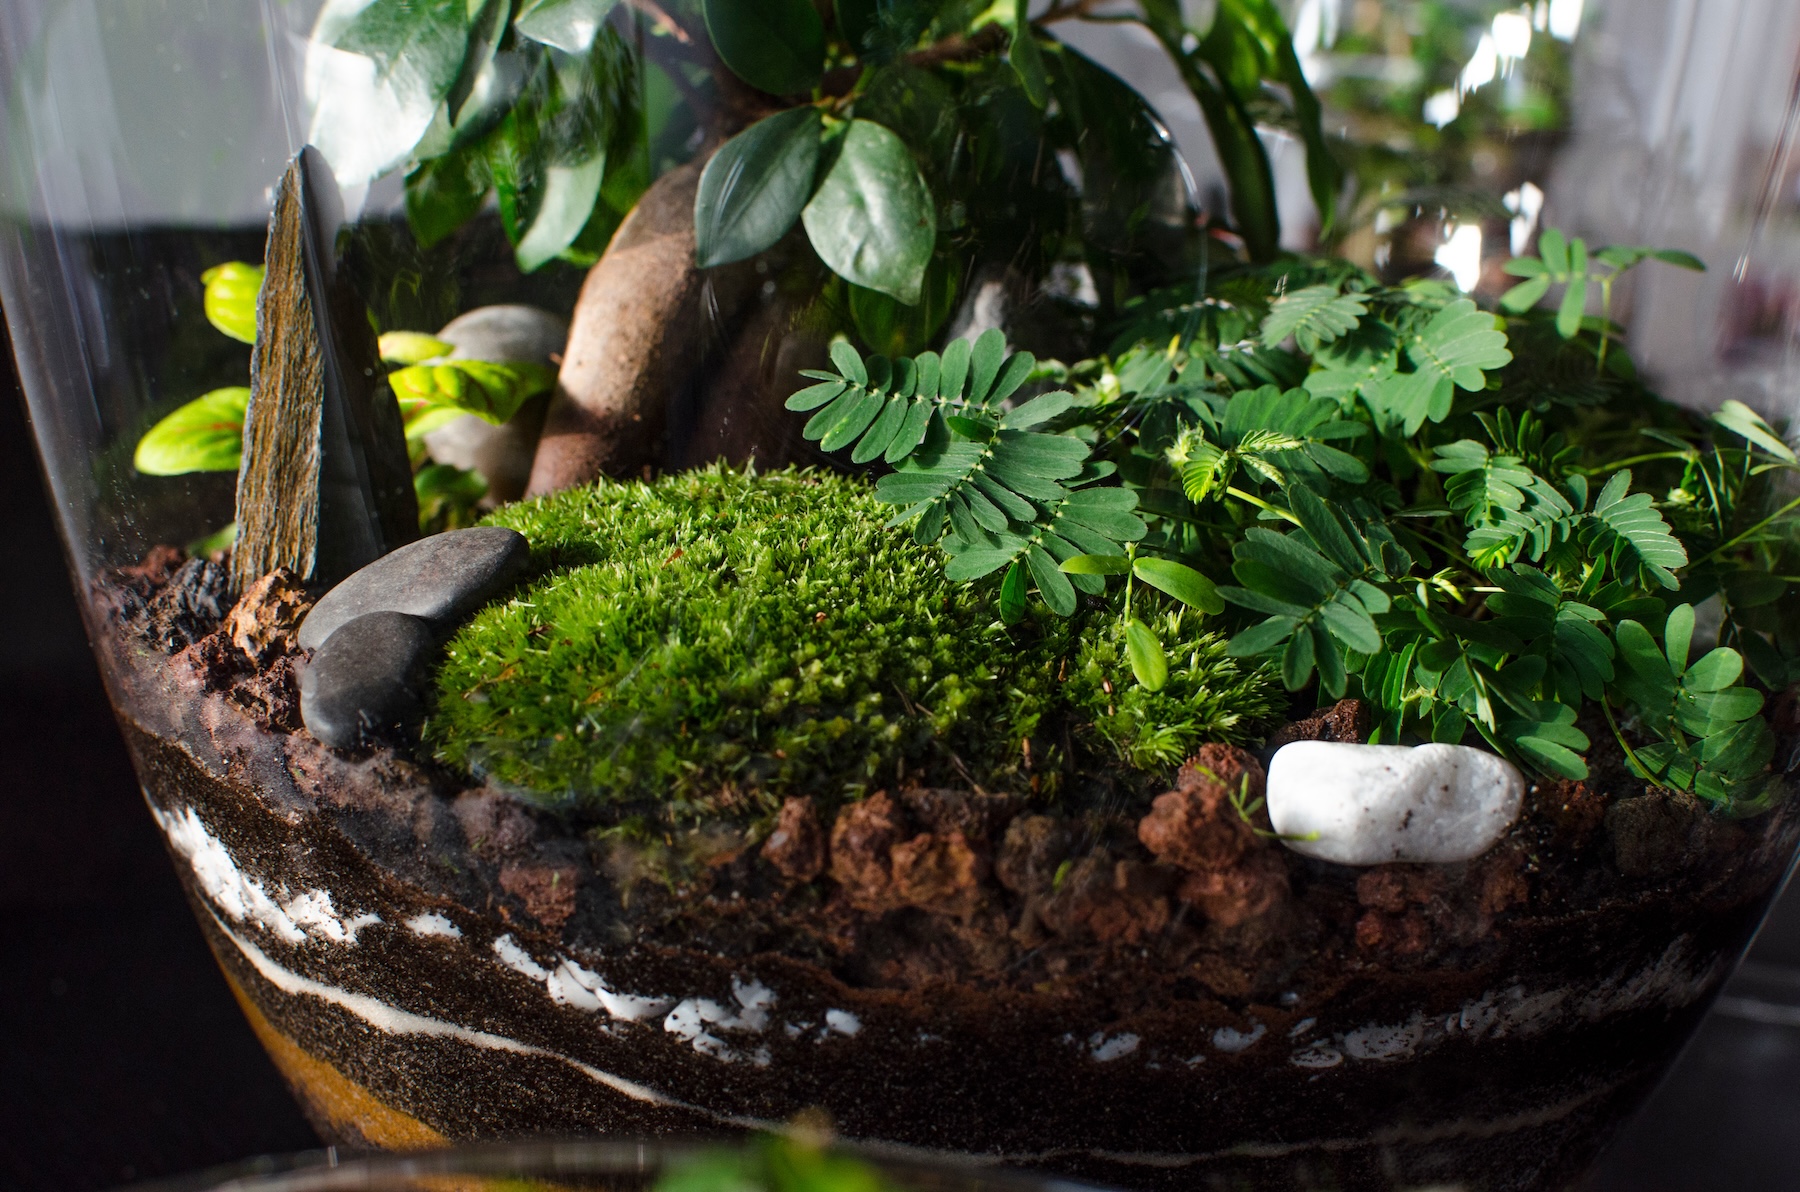 A terrarium showcasing a variety of greenery including lush moss and delicate fern leaves among a bed of earthy stones.